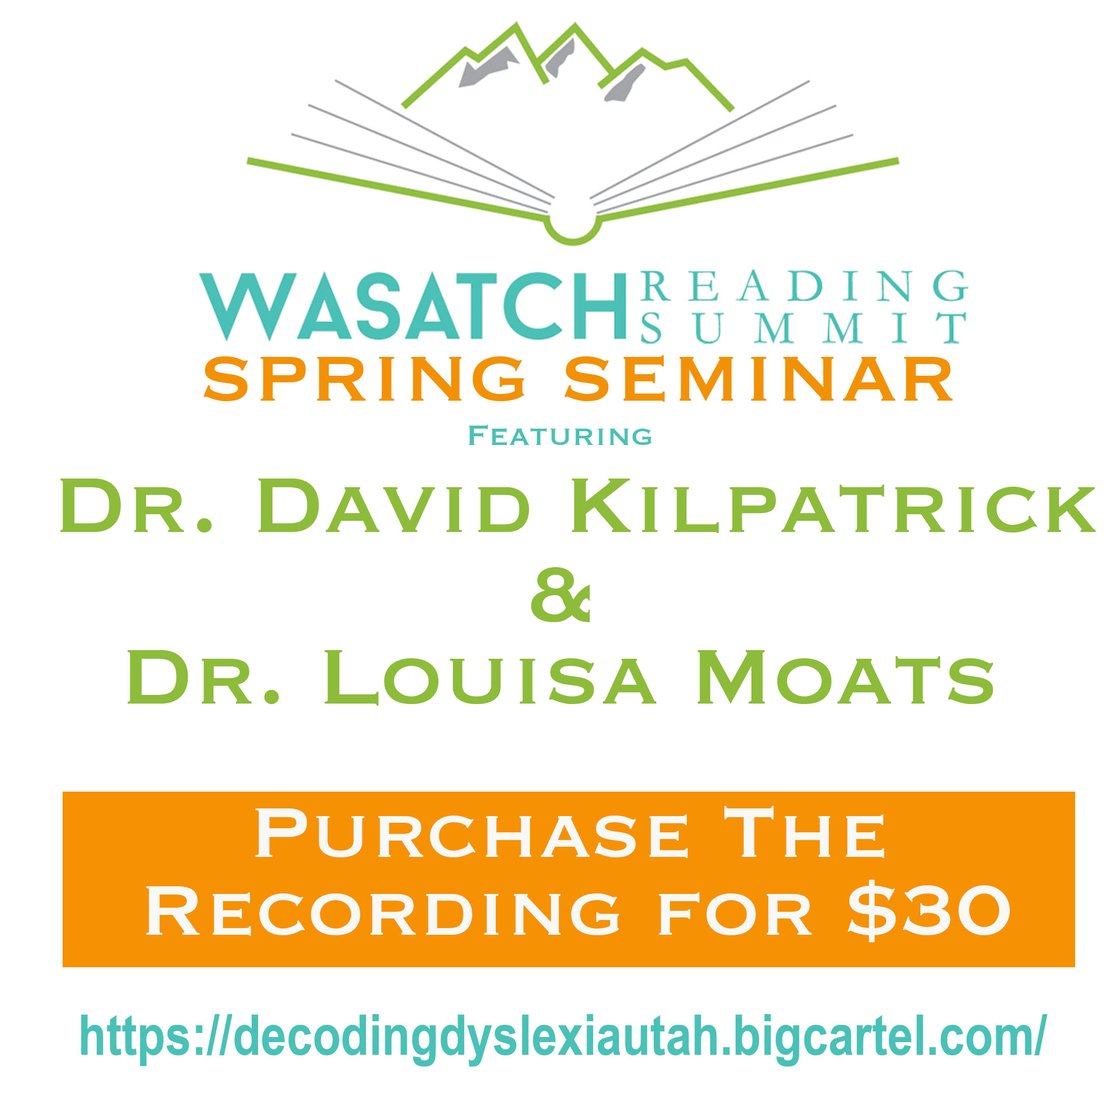 Image of Wasatch Reading Summit Spring Seminar Recording with Dr. David Kilpatrick and Dr. Louis Moats